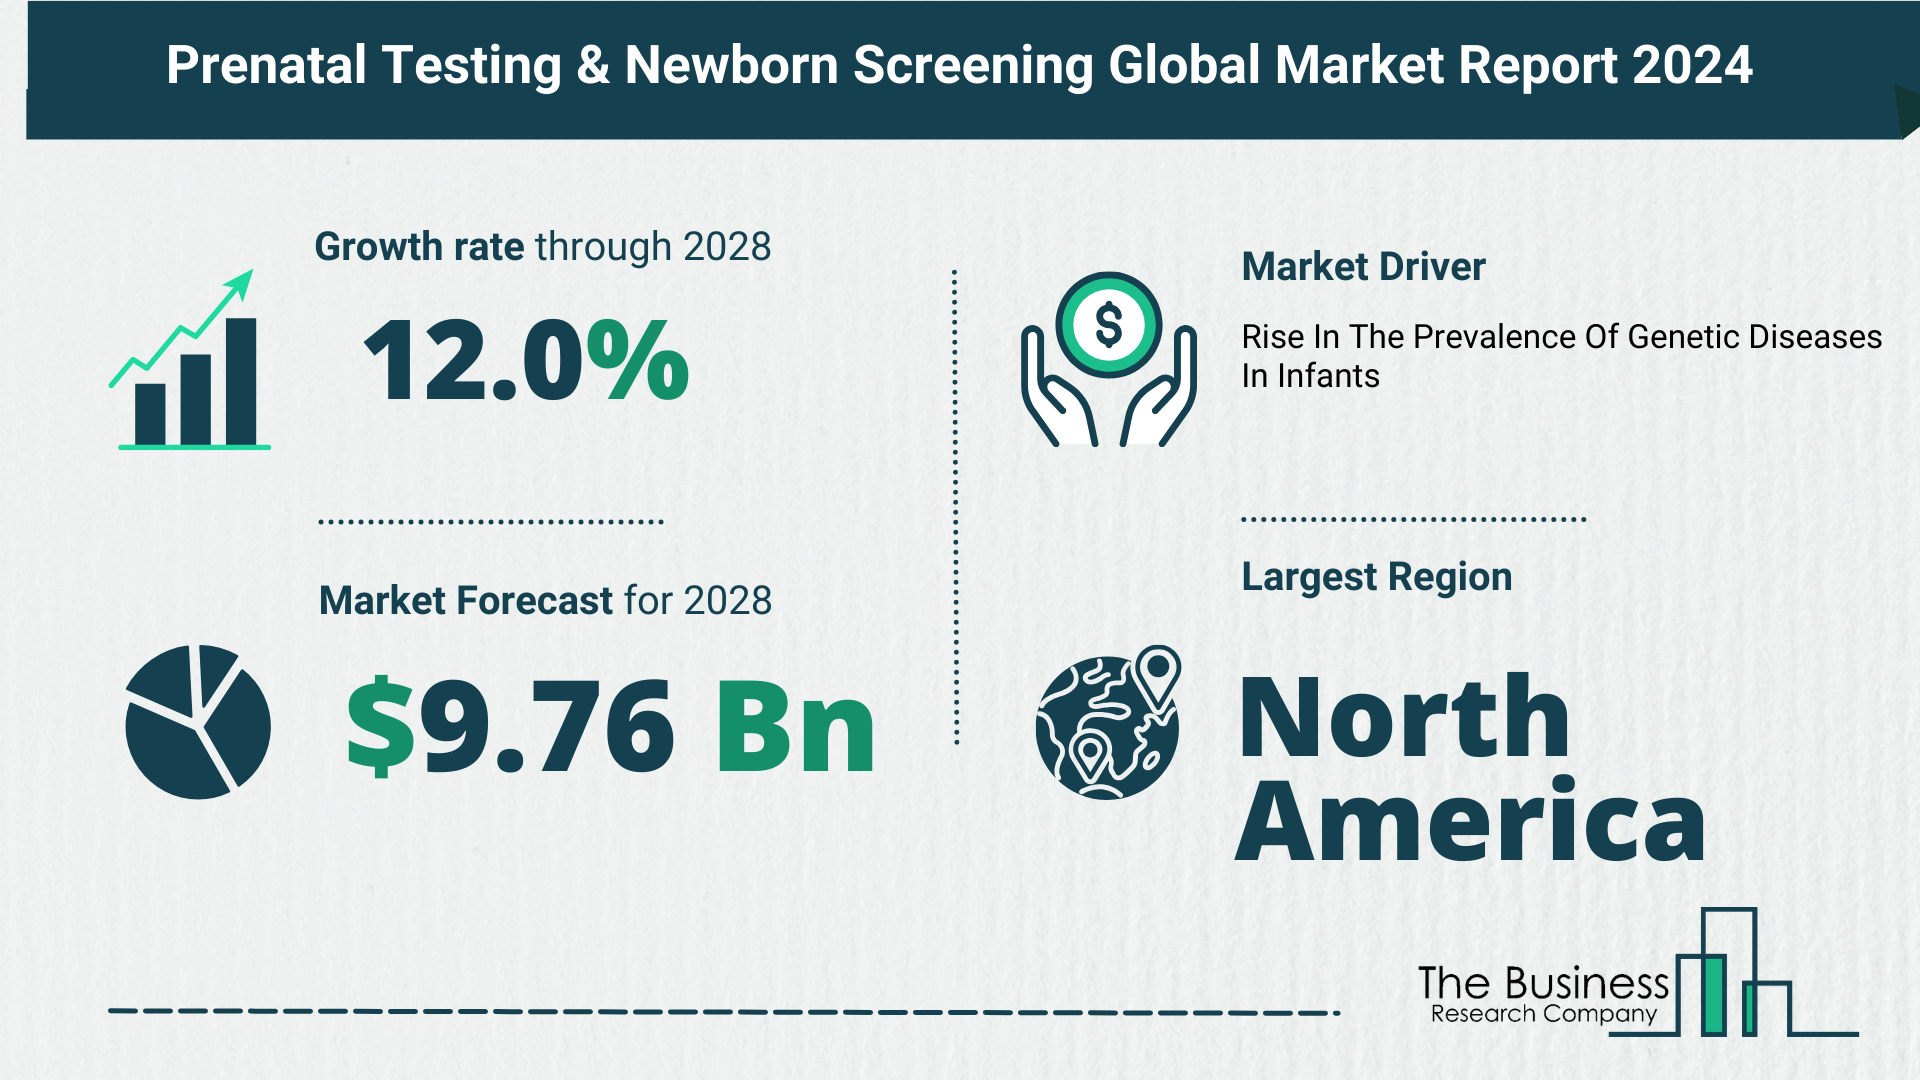 How Is The Prenatal Testing & Newborn Screening Market Expected To Grow Through 2024-2033